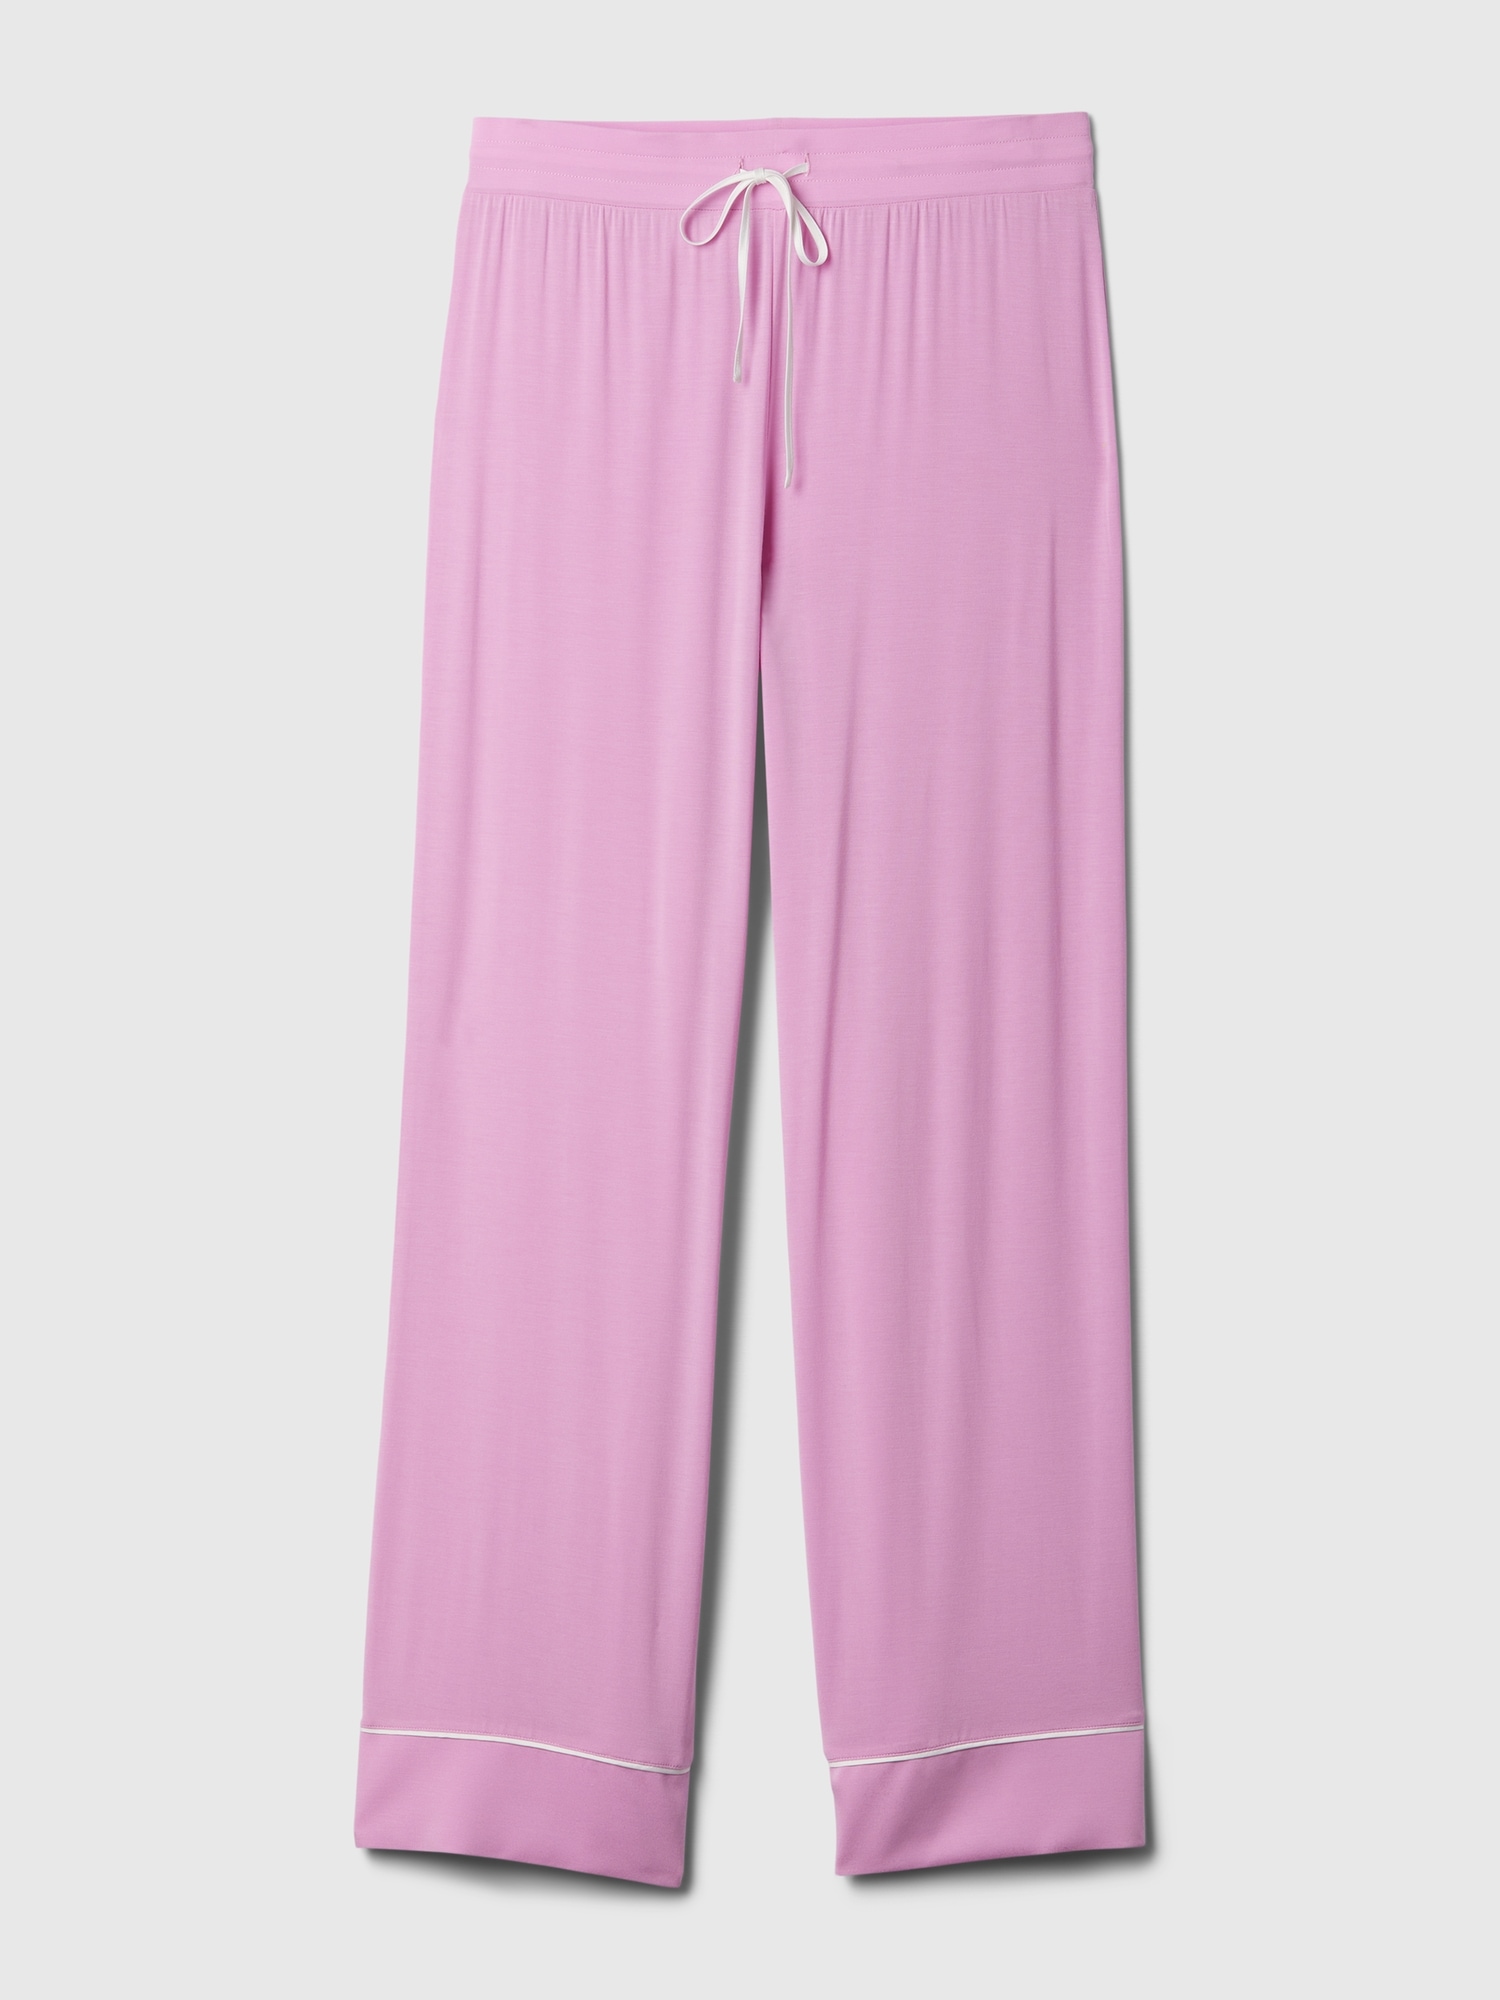 Women's Perfectly Cozy Lounge Jogger Pants - Stars Above™ Pink 2X